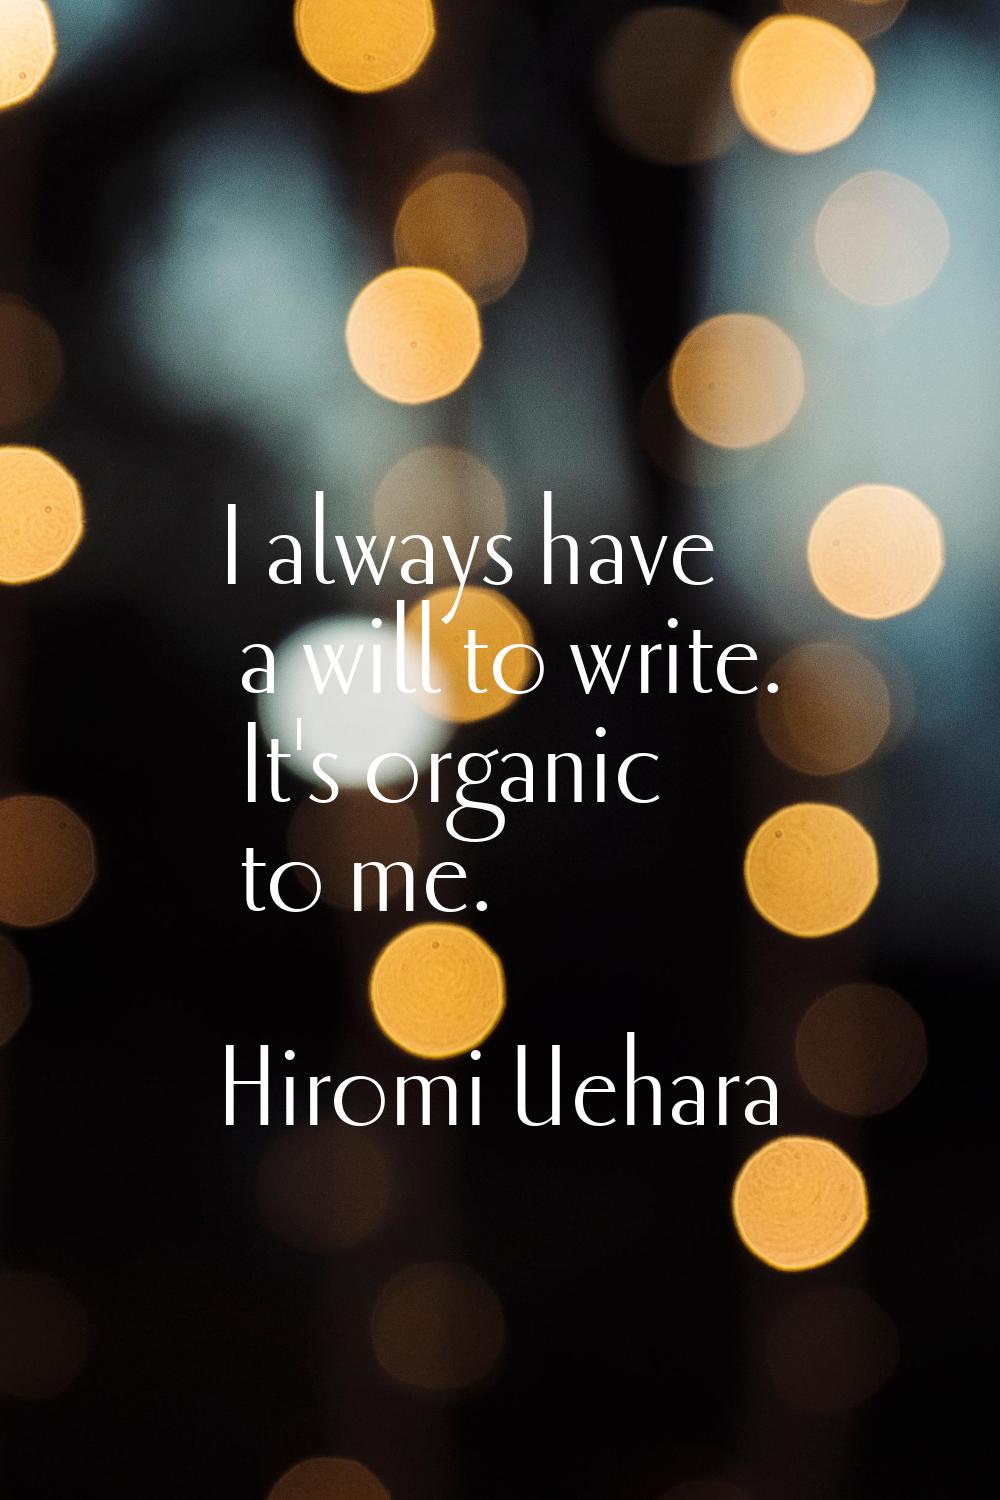 I always have a will to write. It's organic to me.